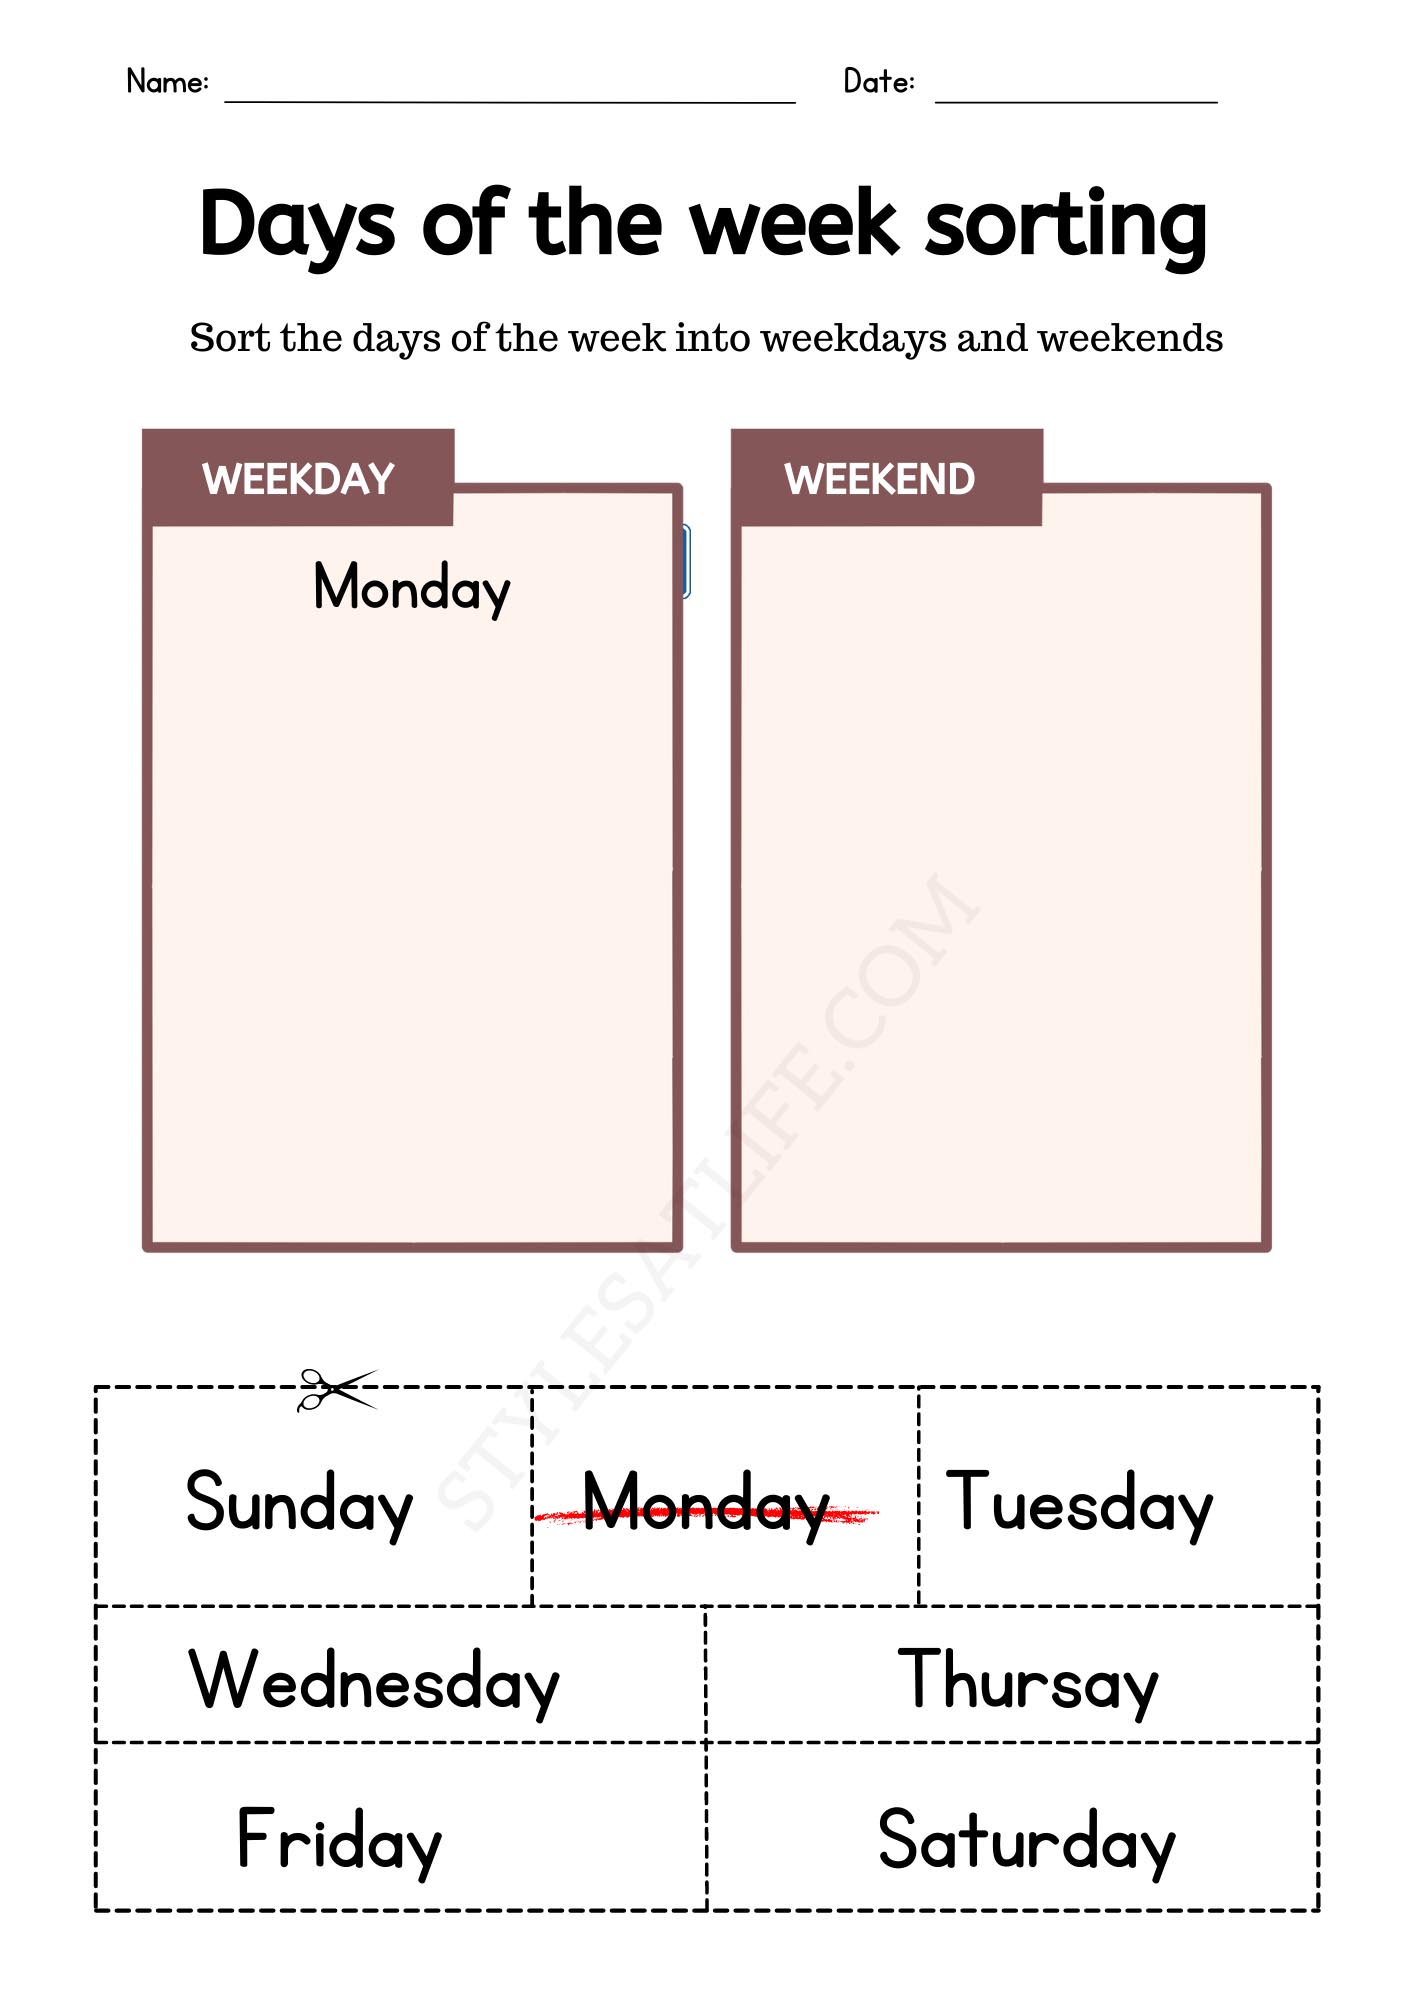 Days of the Week Sorting Activity